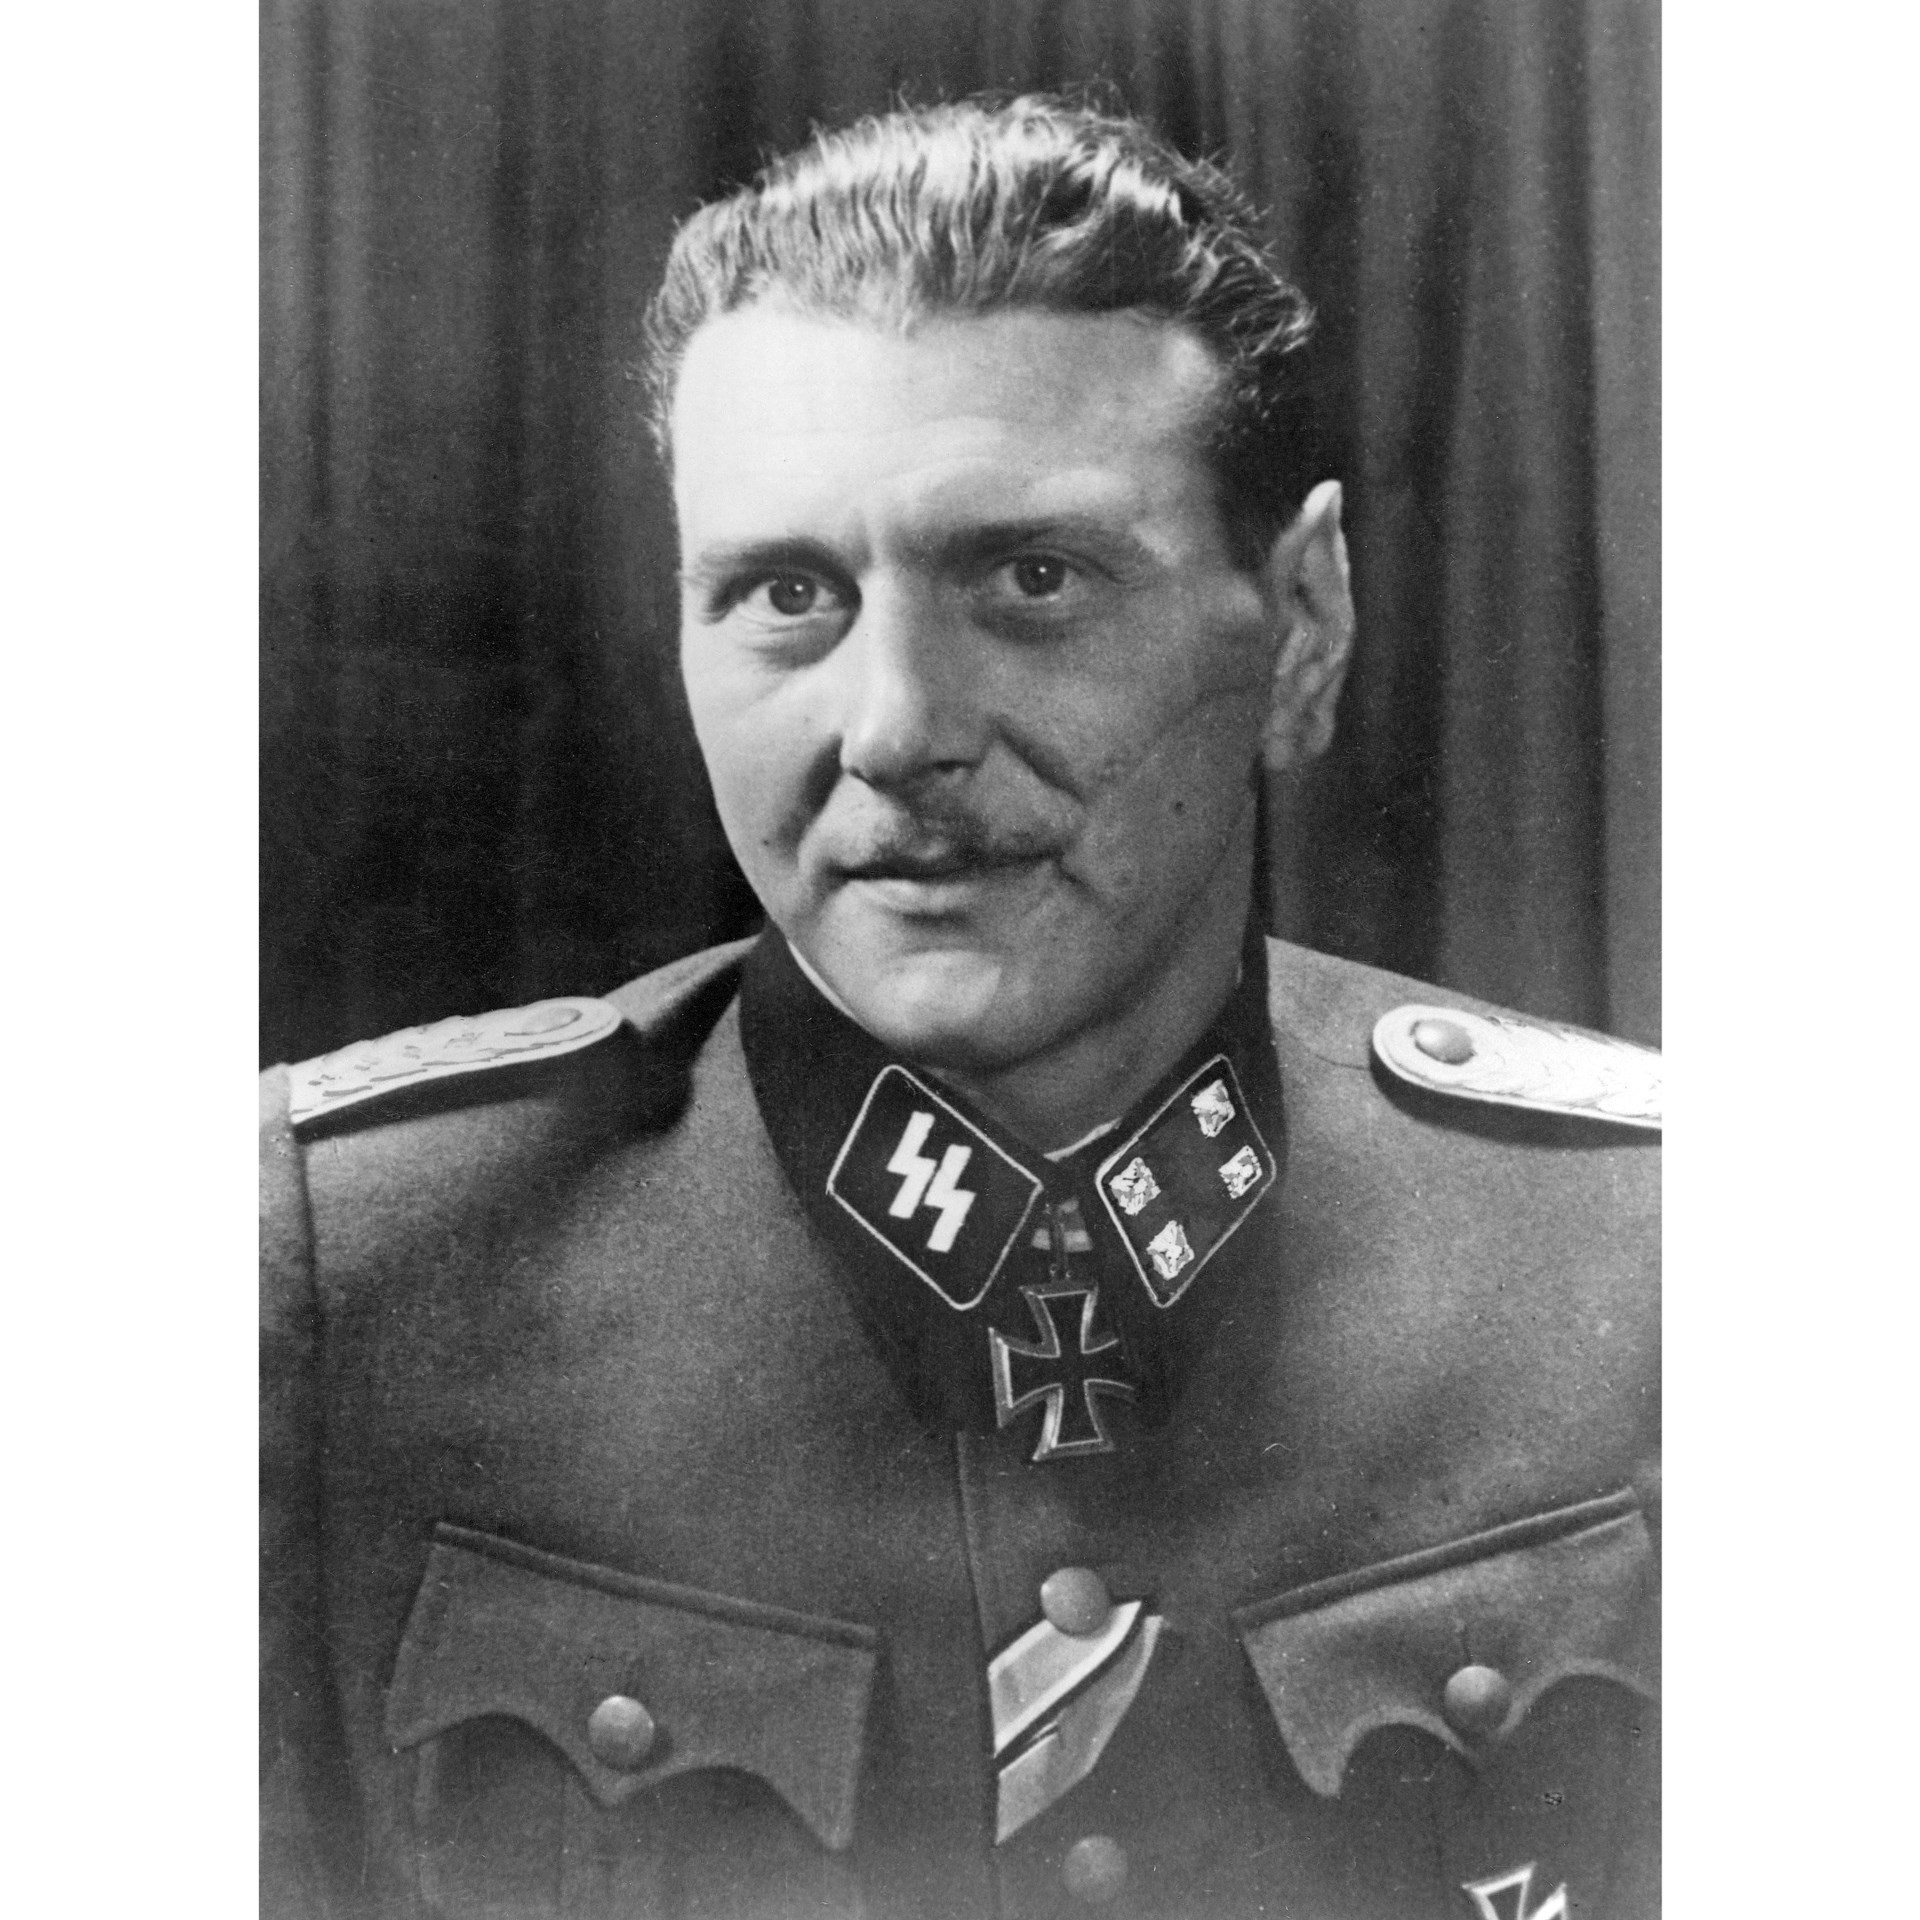 “The Most Dangerous Man In Europe”: Otto Skorzeny after capture in 1945. U.S. National Archives and Records Administration photograph.